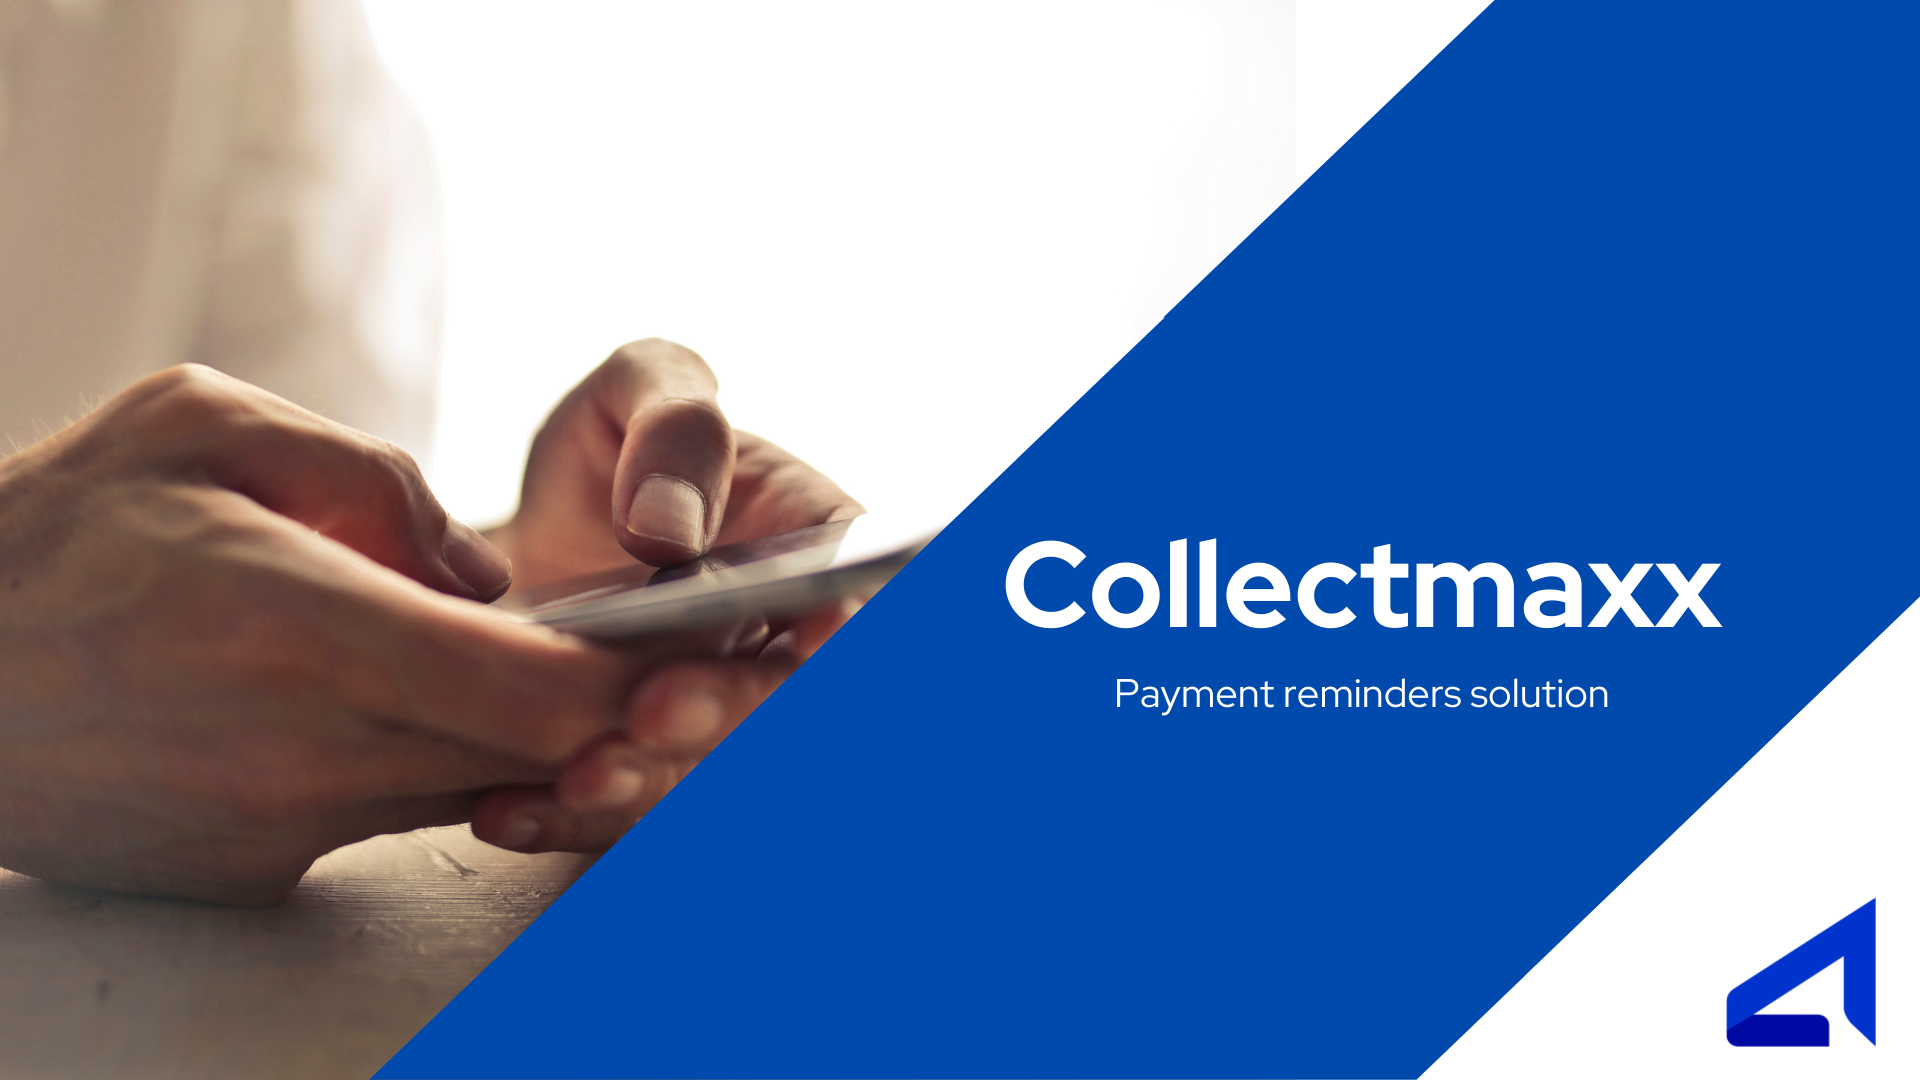 Collectmaxx – mass payment collection made personal